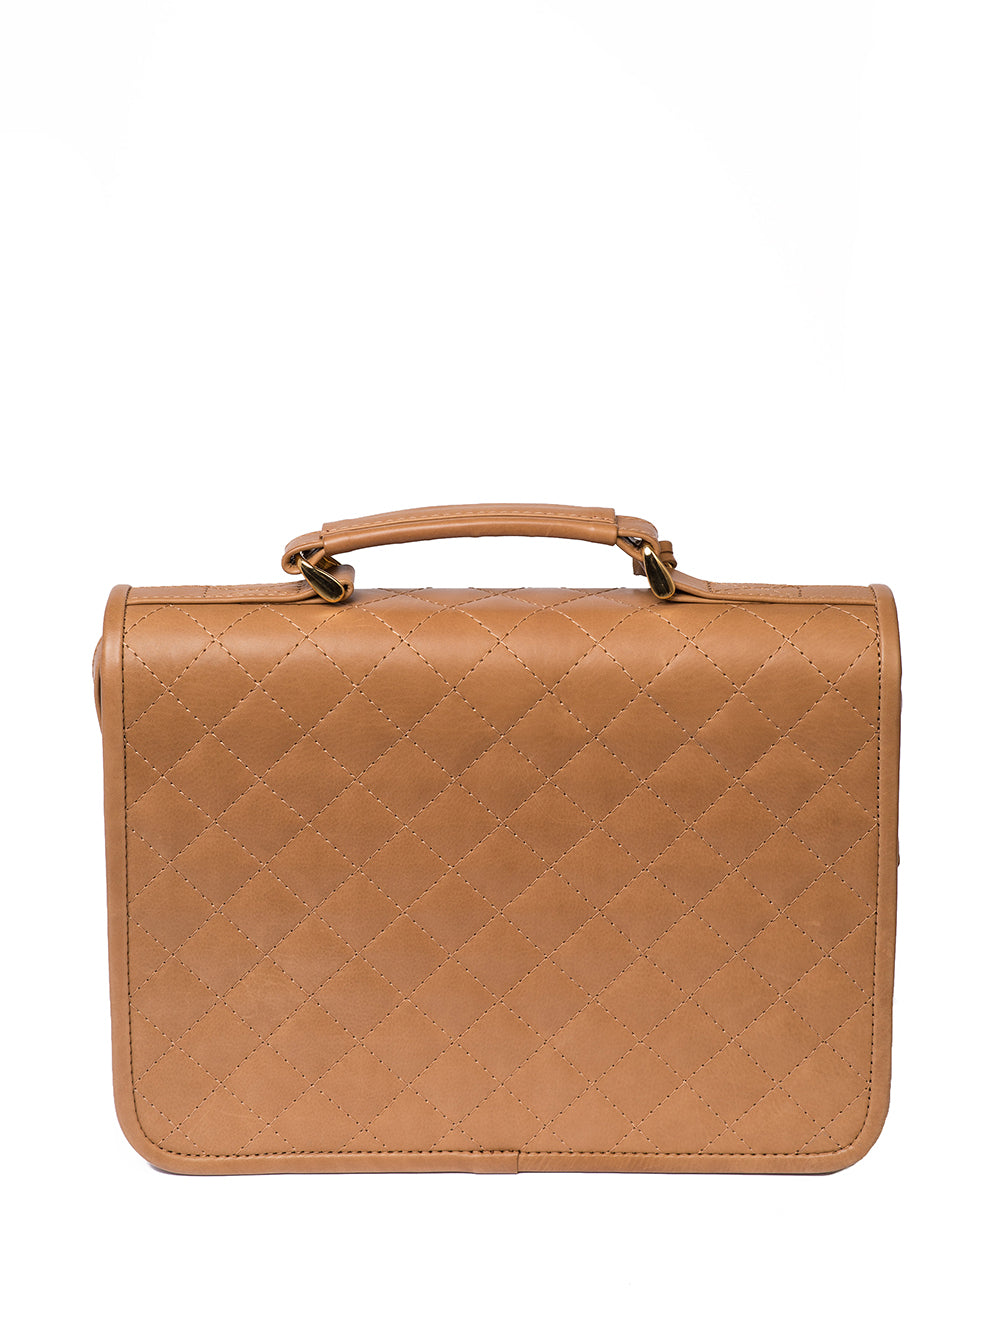 Quilted leather satchel bag - Camel by Inga Xavier